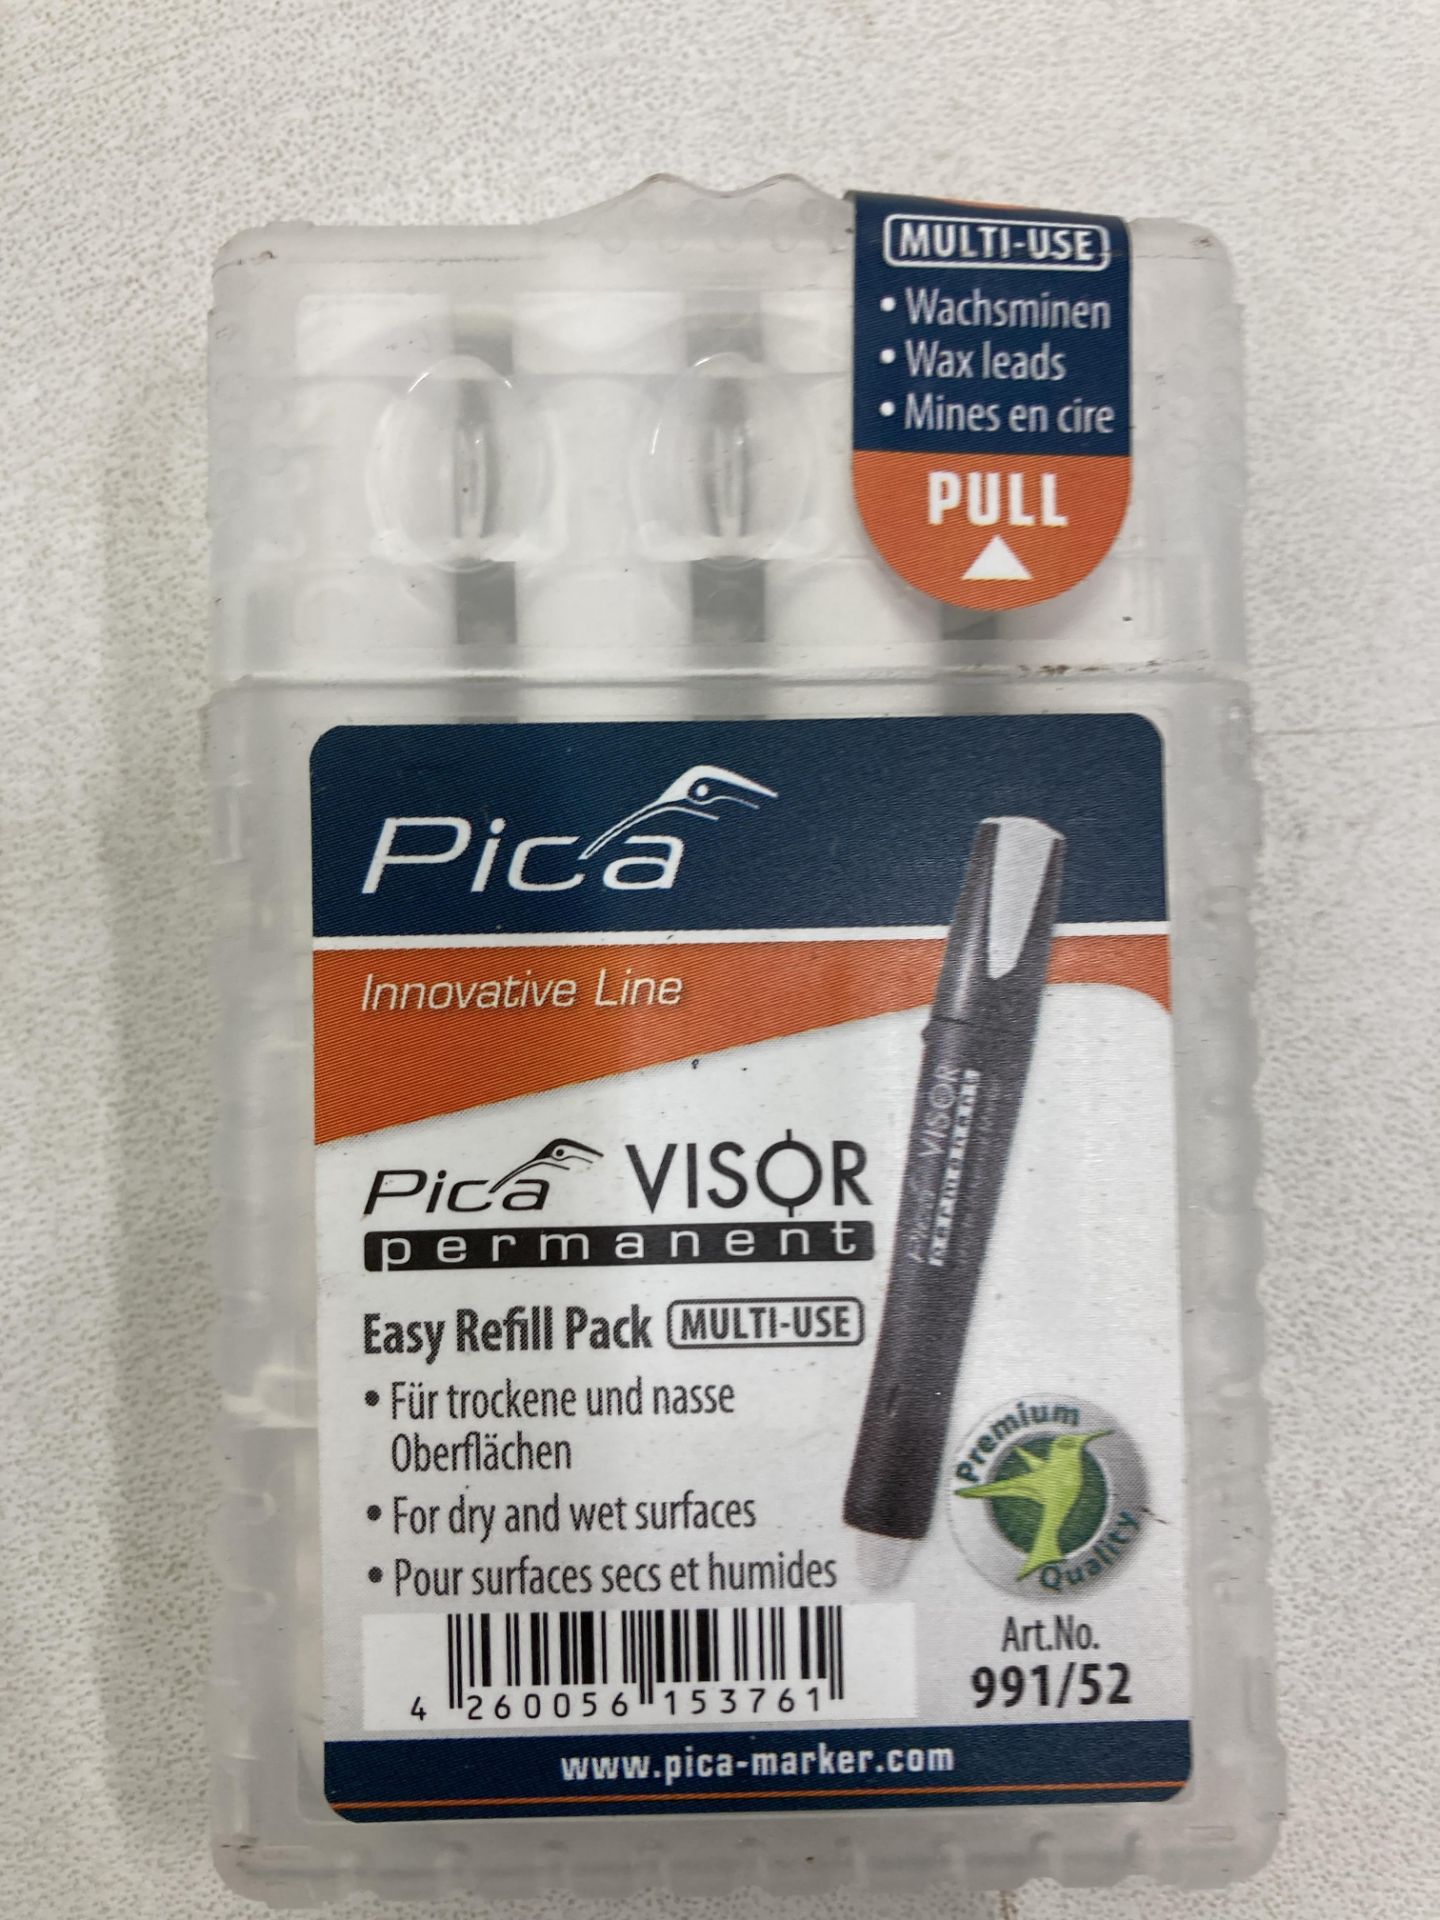 Pica-Dry Refill Leads & Markers - Image 8 of 11